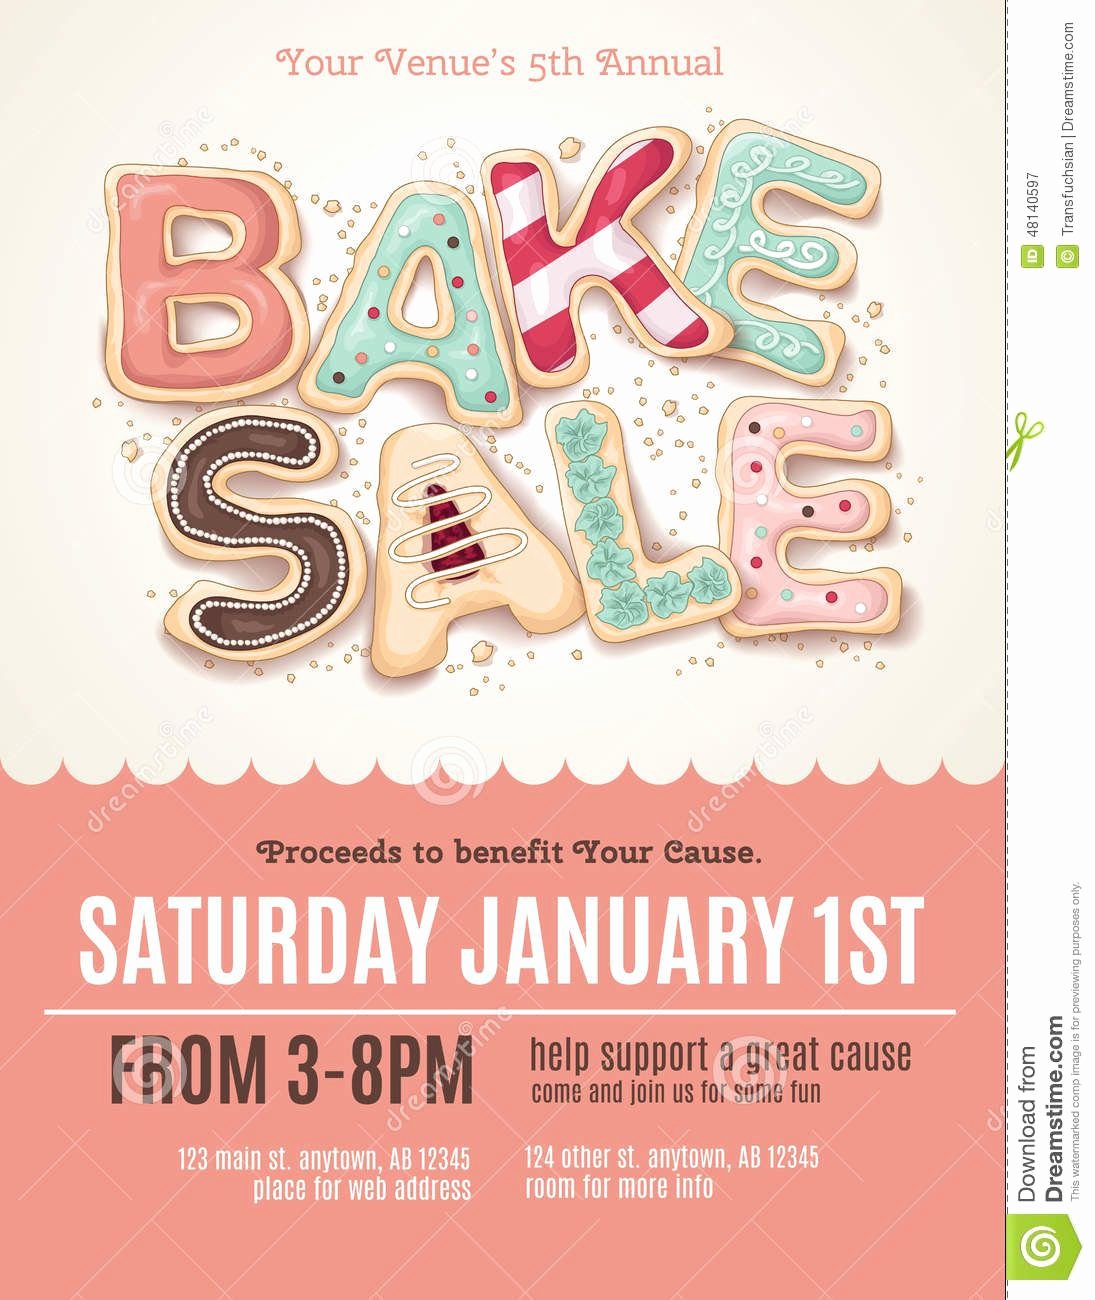 Fun Cookie Bake Sale Flyer Template Download From Over